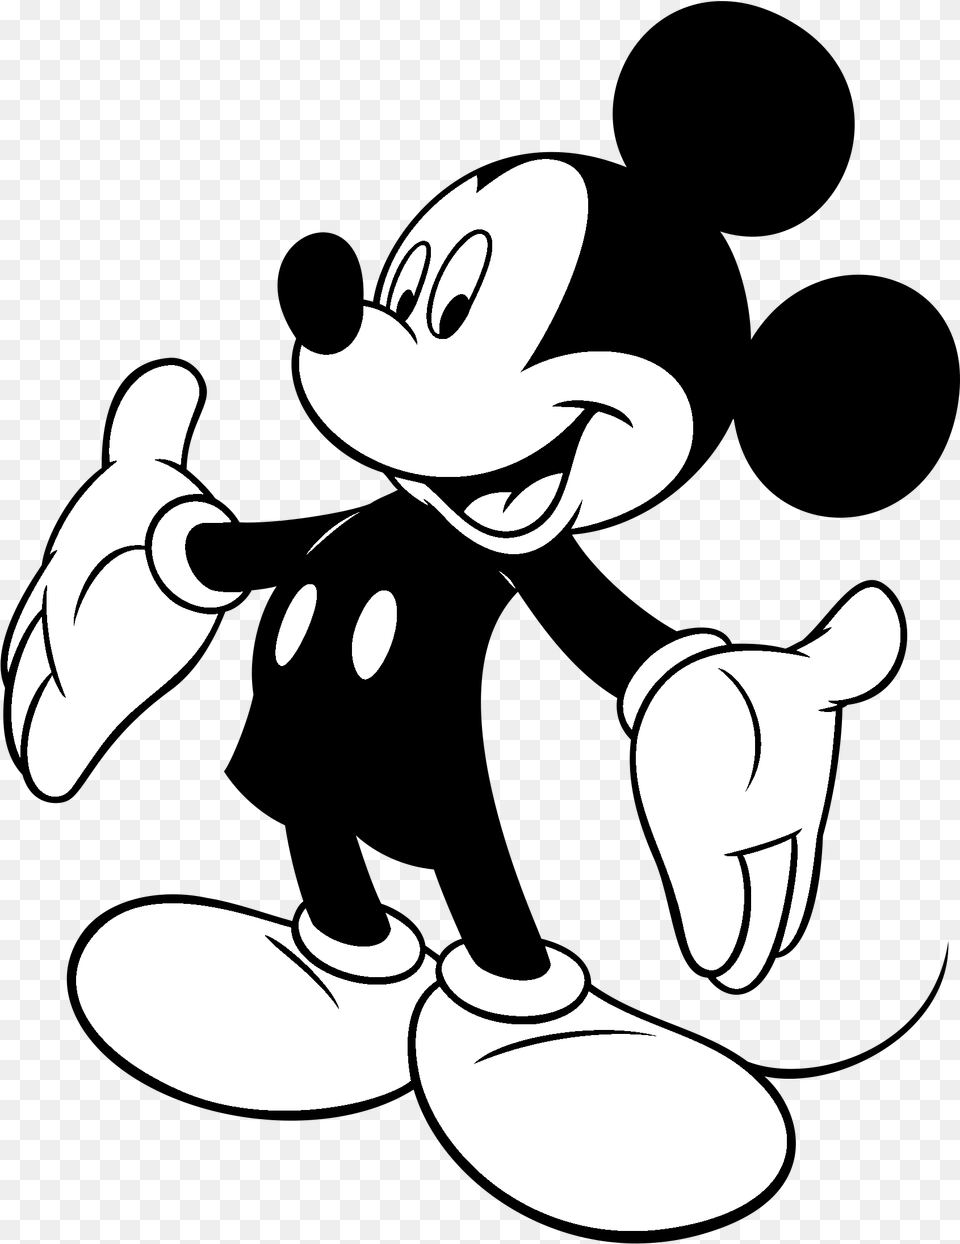 Mickey Mouse Minnie Mouse Scalable Vector Graphics Mickey Mouse Sticker, Stencil, Cartoon, Animal, Mammal Png